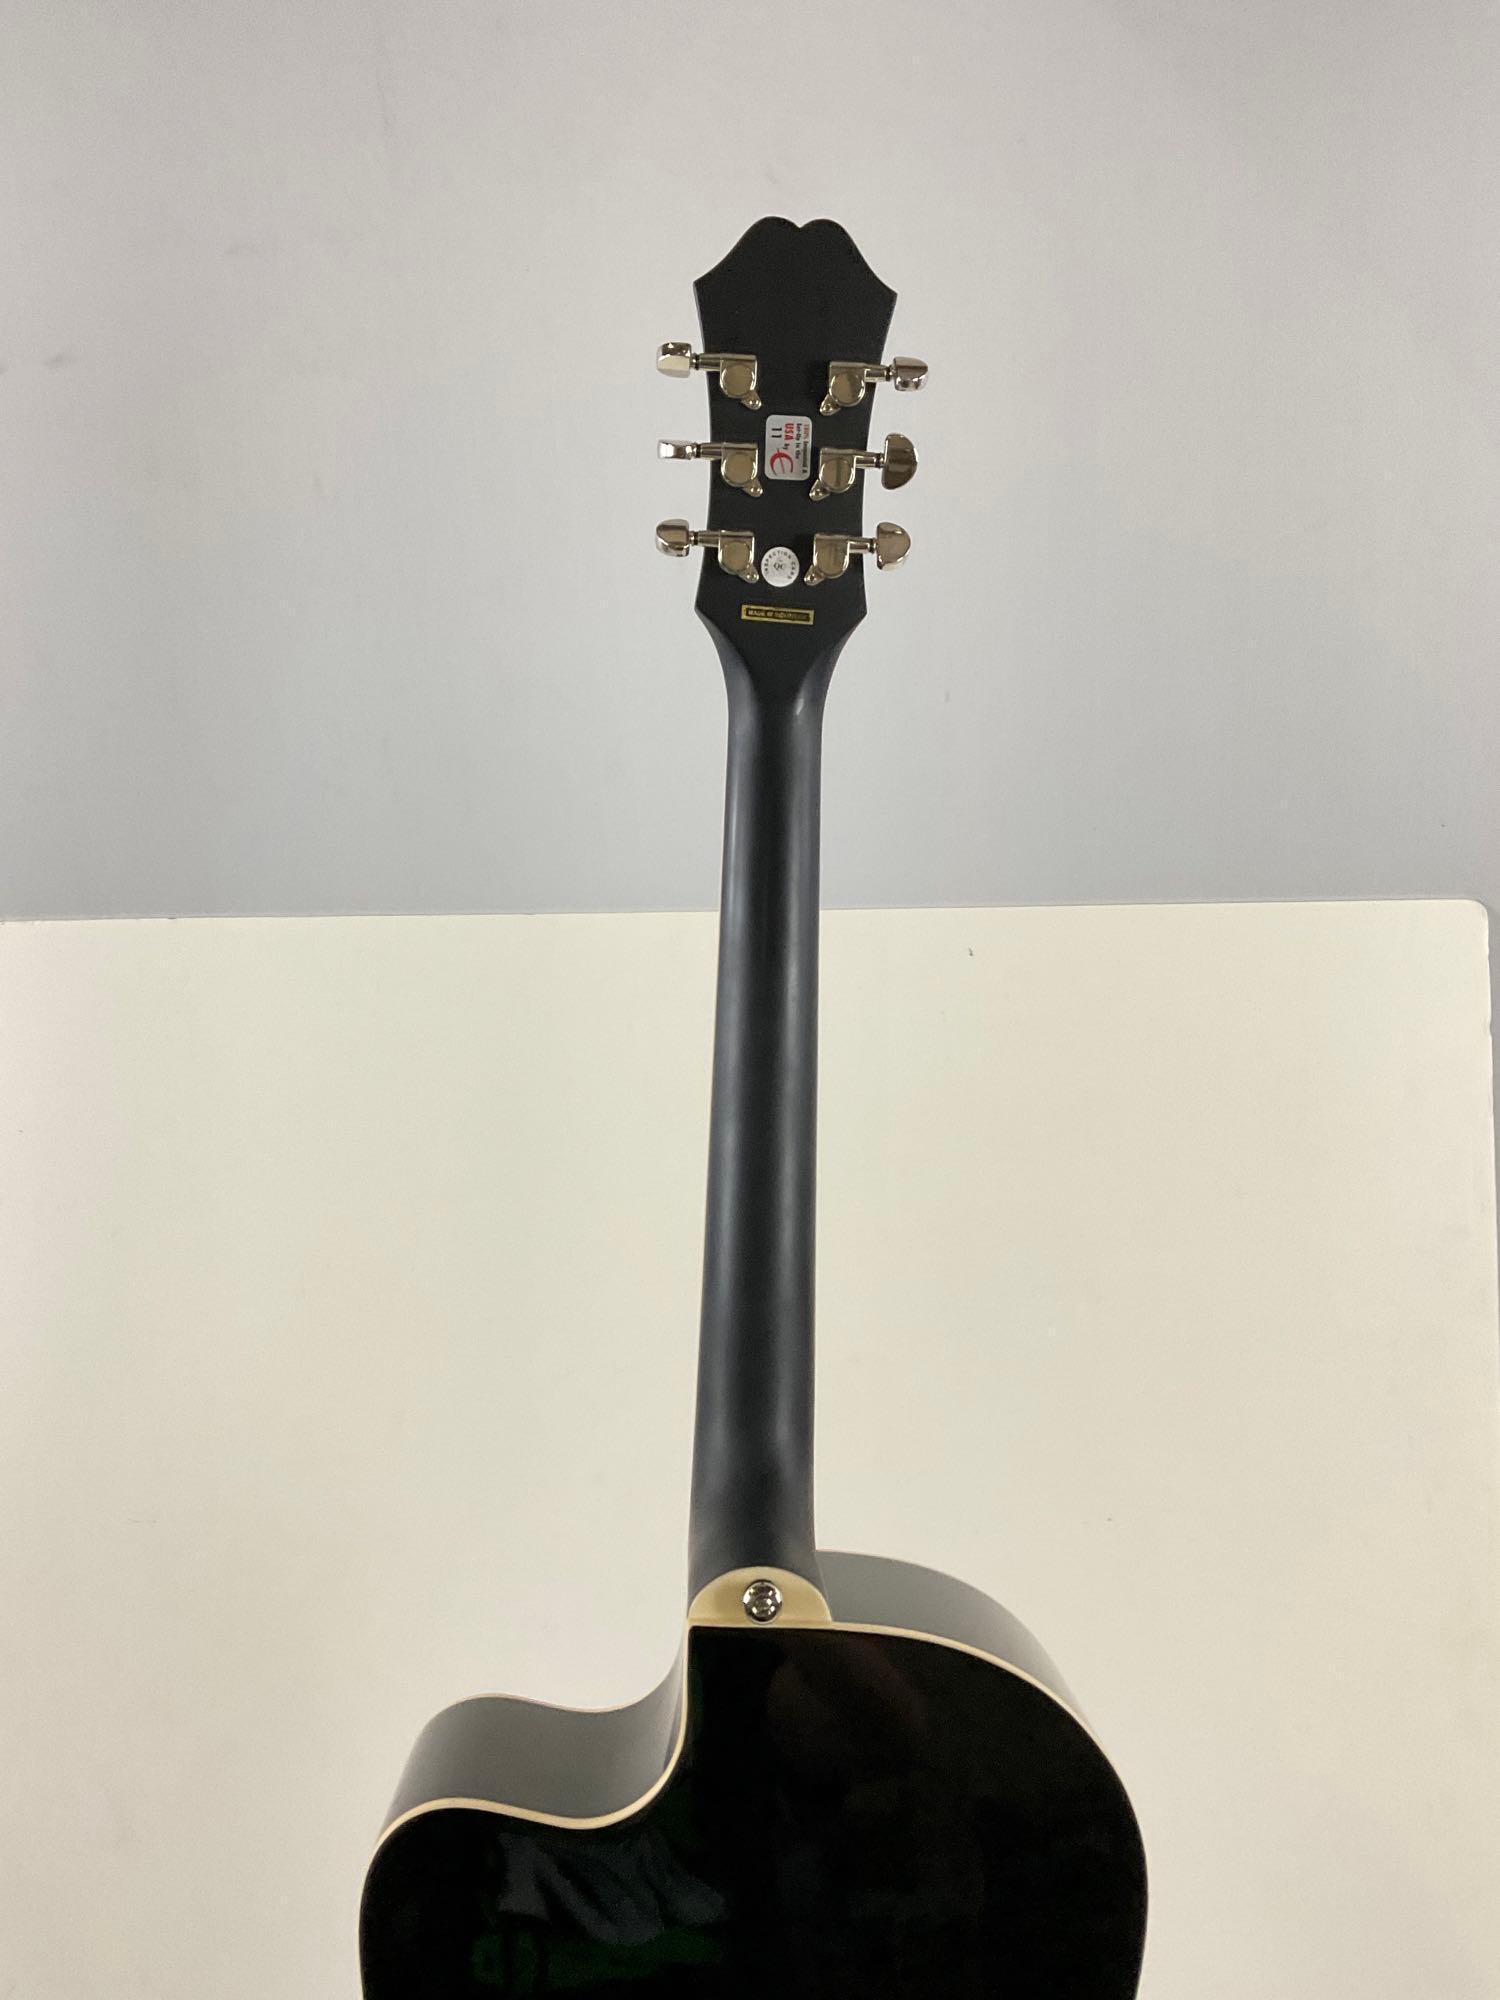 Immaculate Epiphone AJ acoustic/electric guitar comes with foldable guitar stand